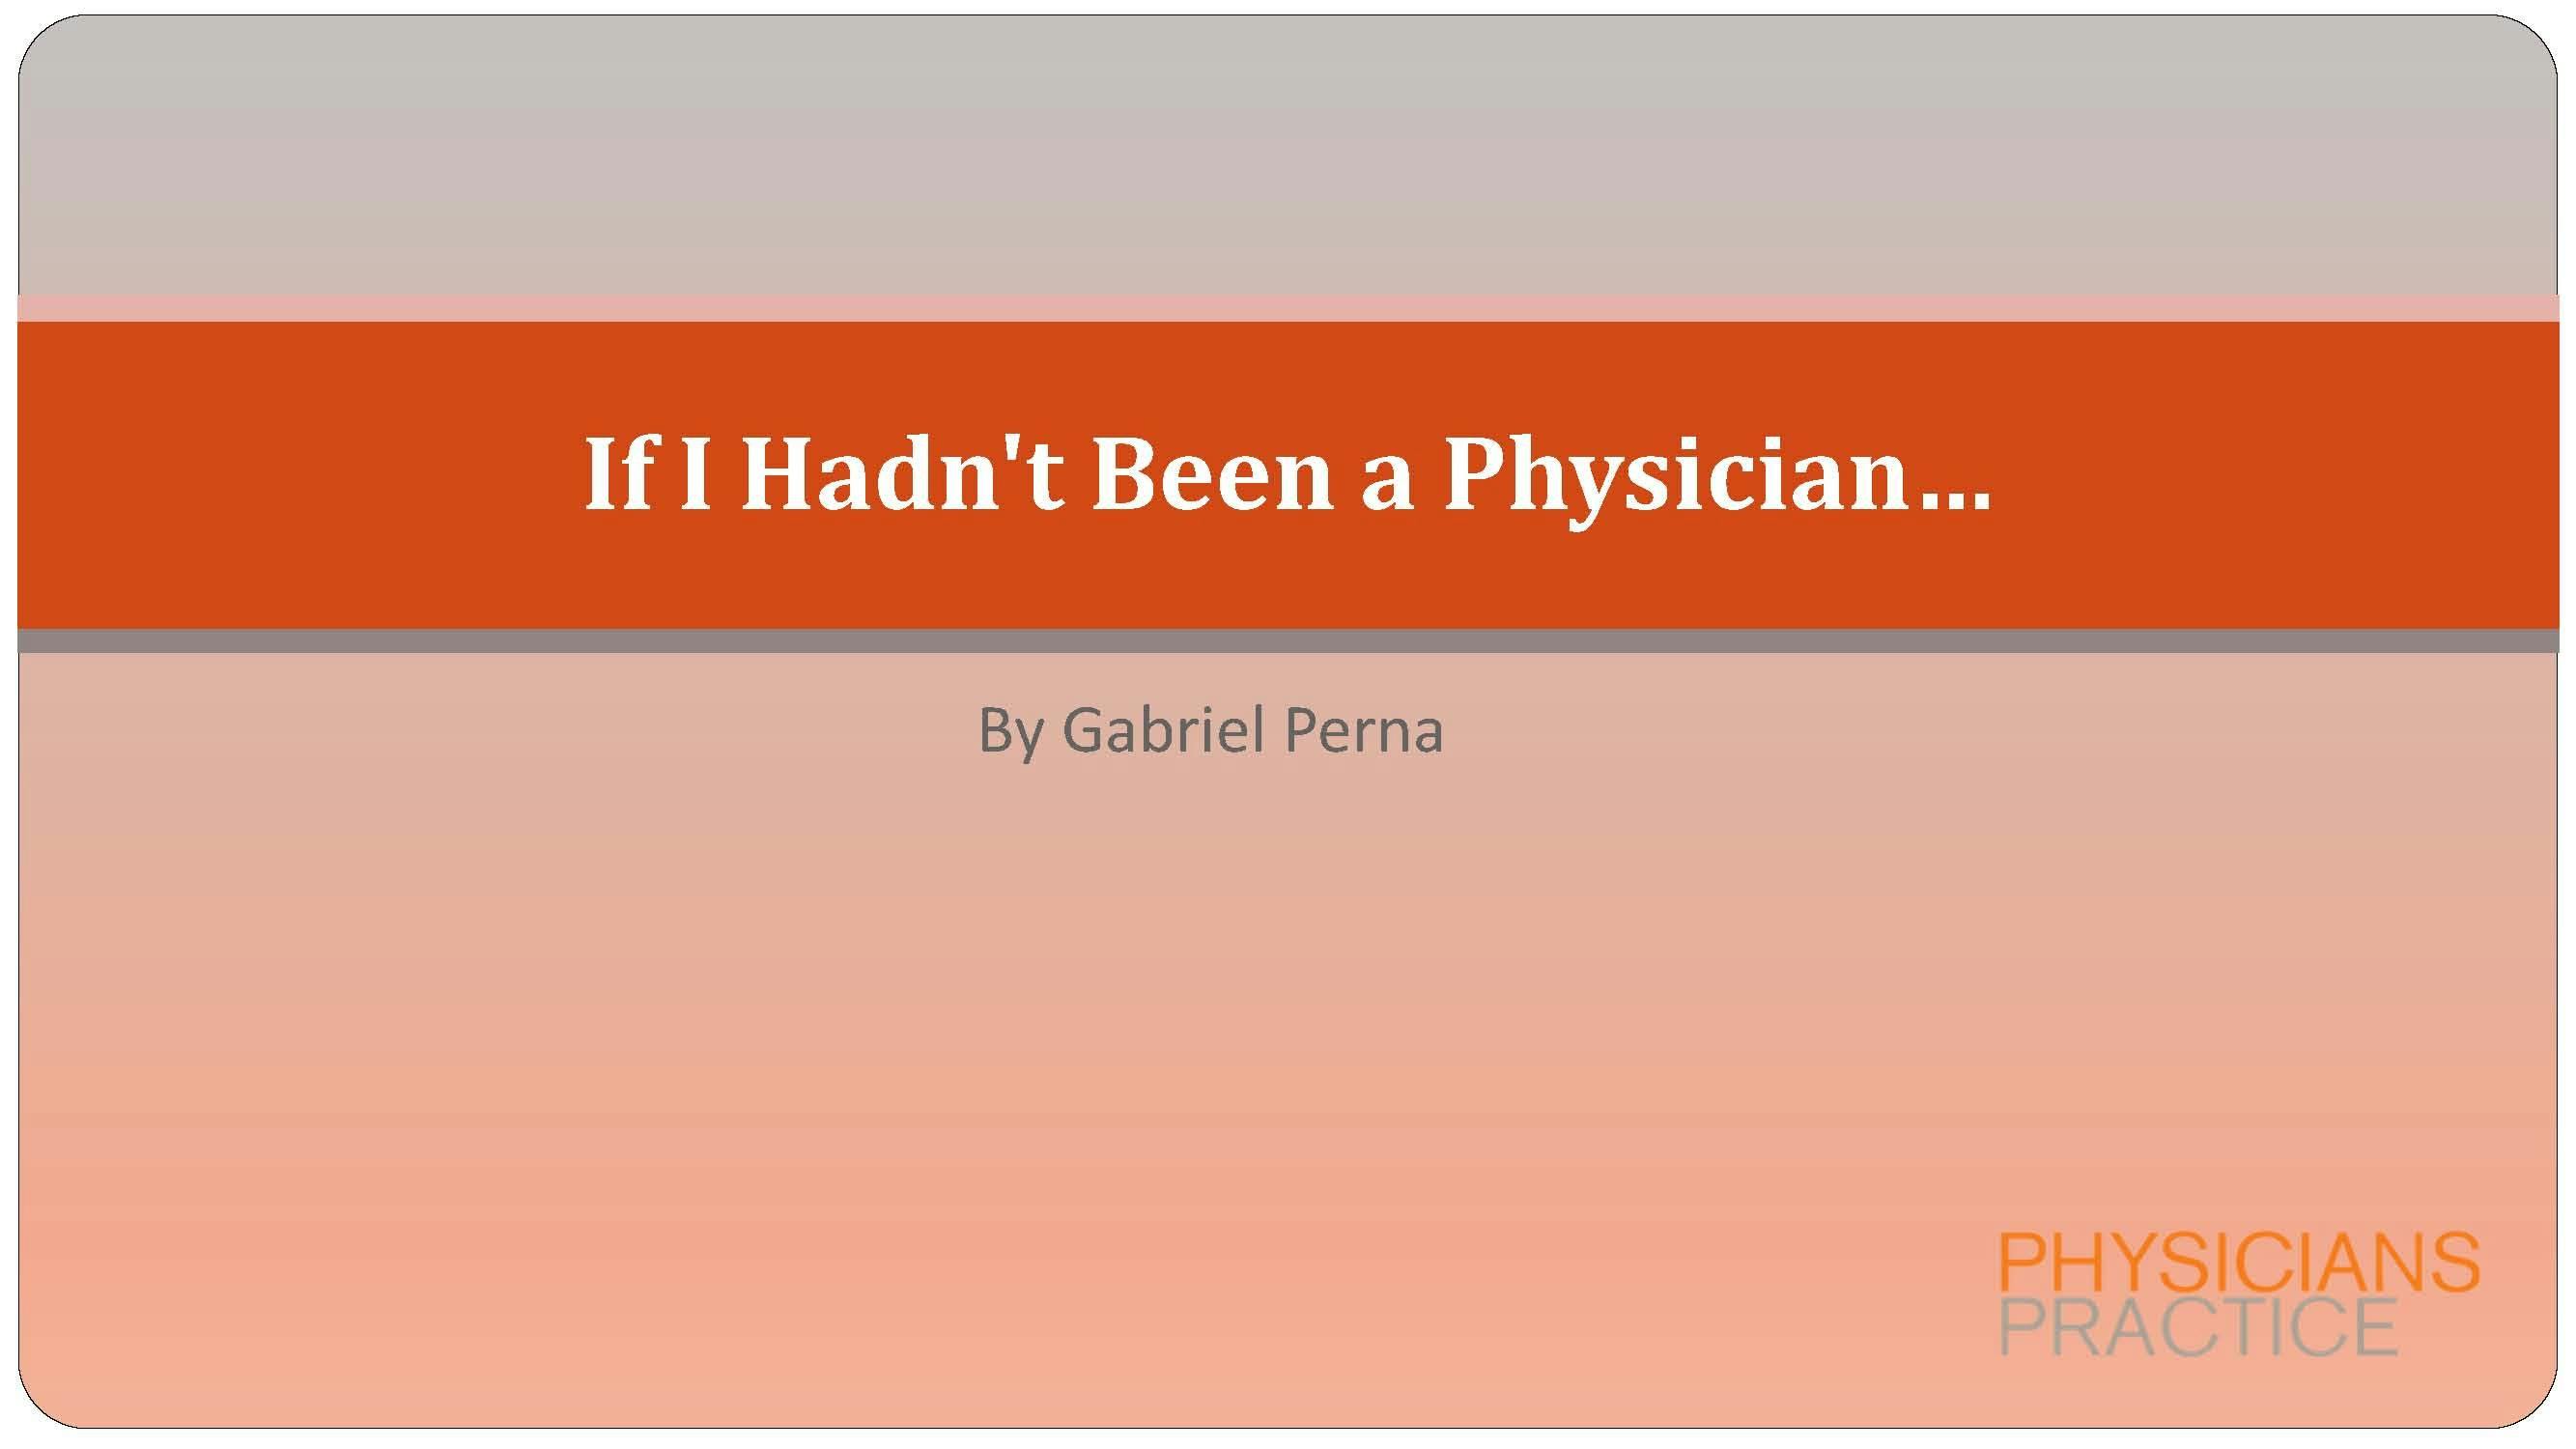 If I Hadn't Been a Physician…